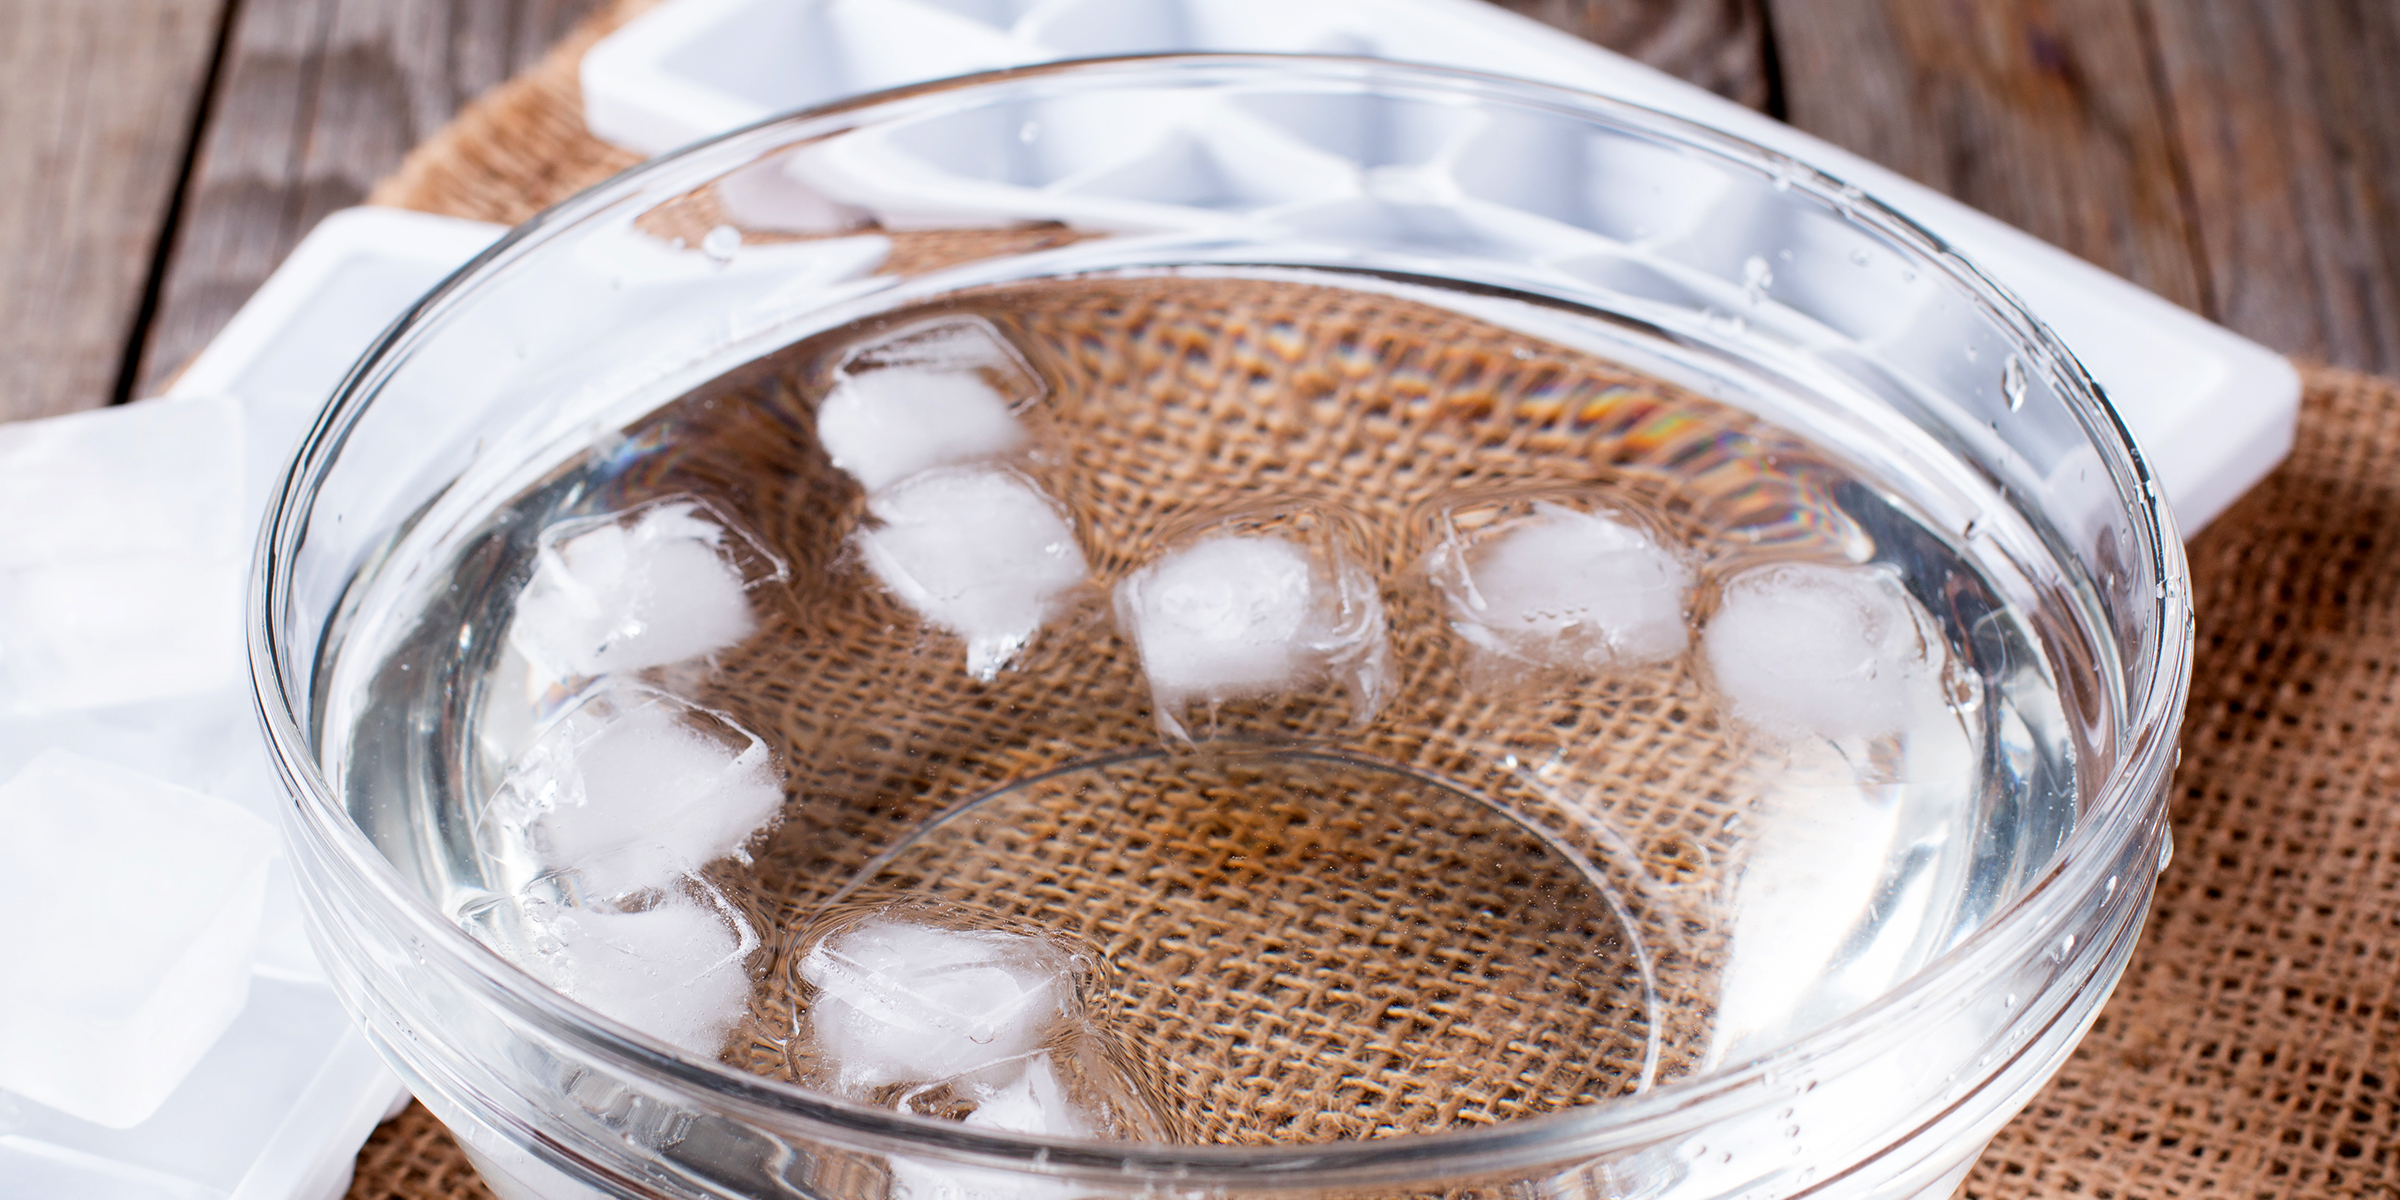 A Bowl Filled with Water and Ice | Source: Shutterstock